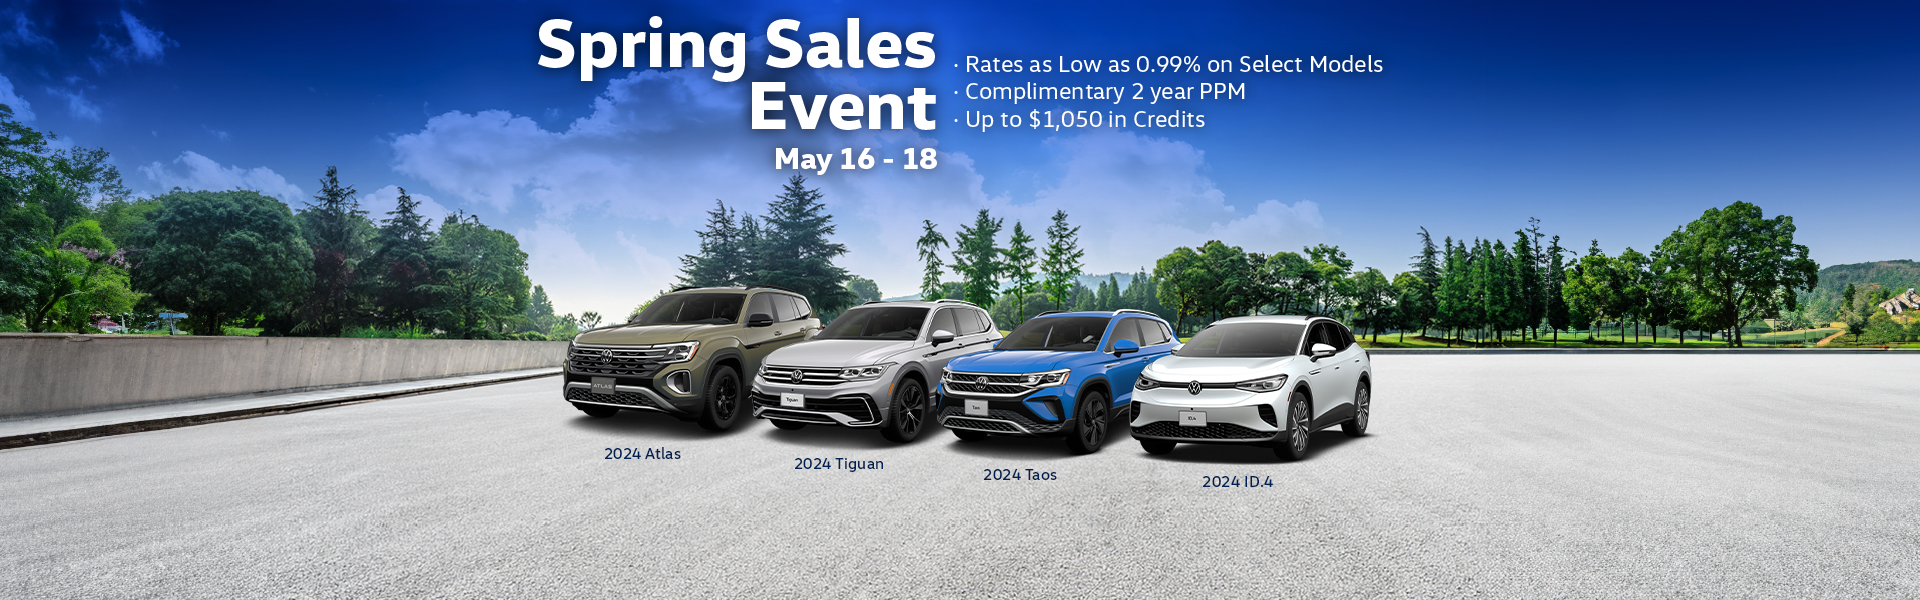 Spring Sales Event - May 16 to 18